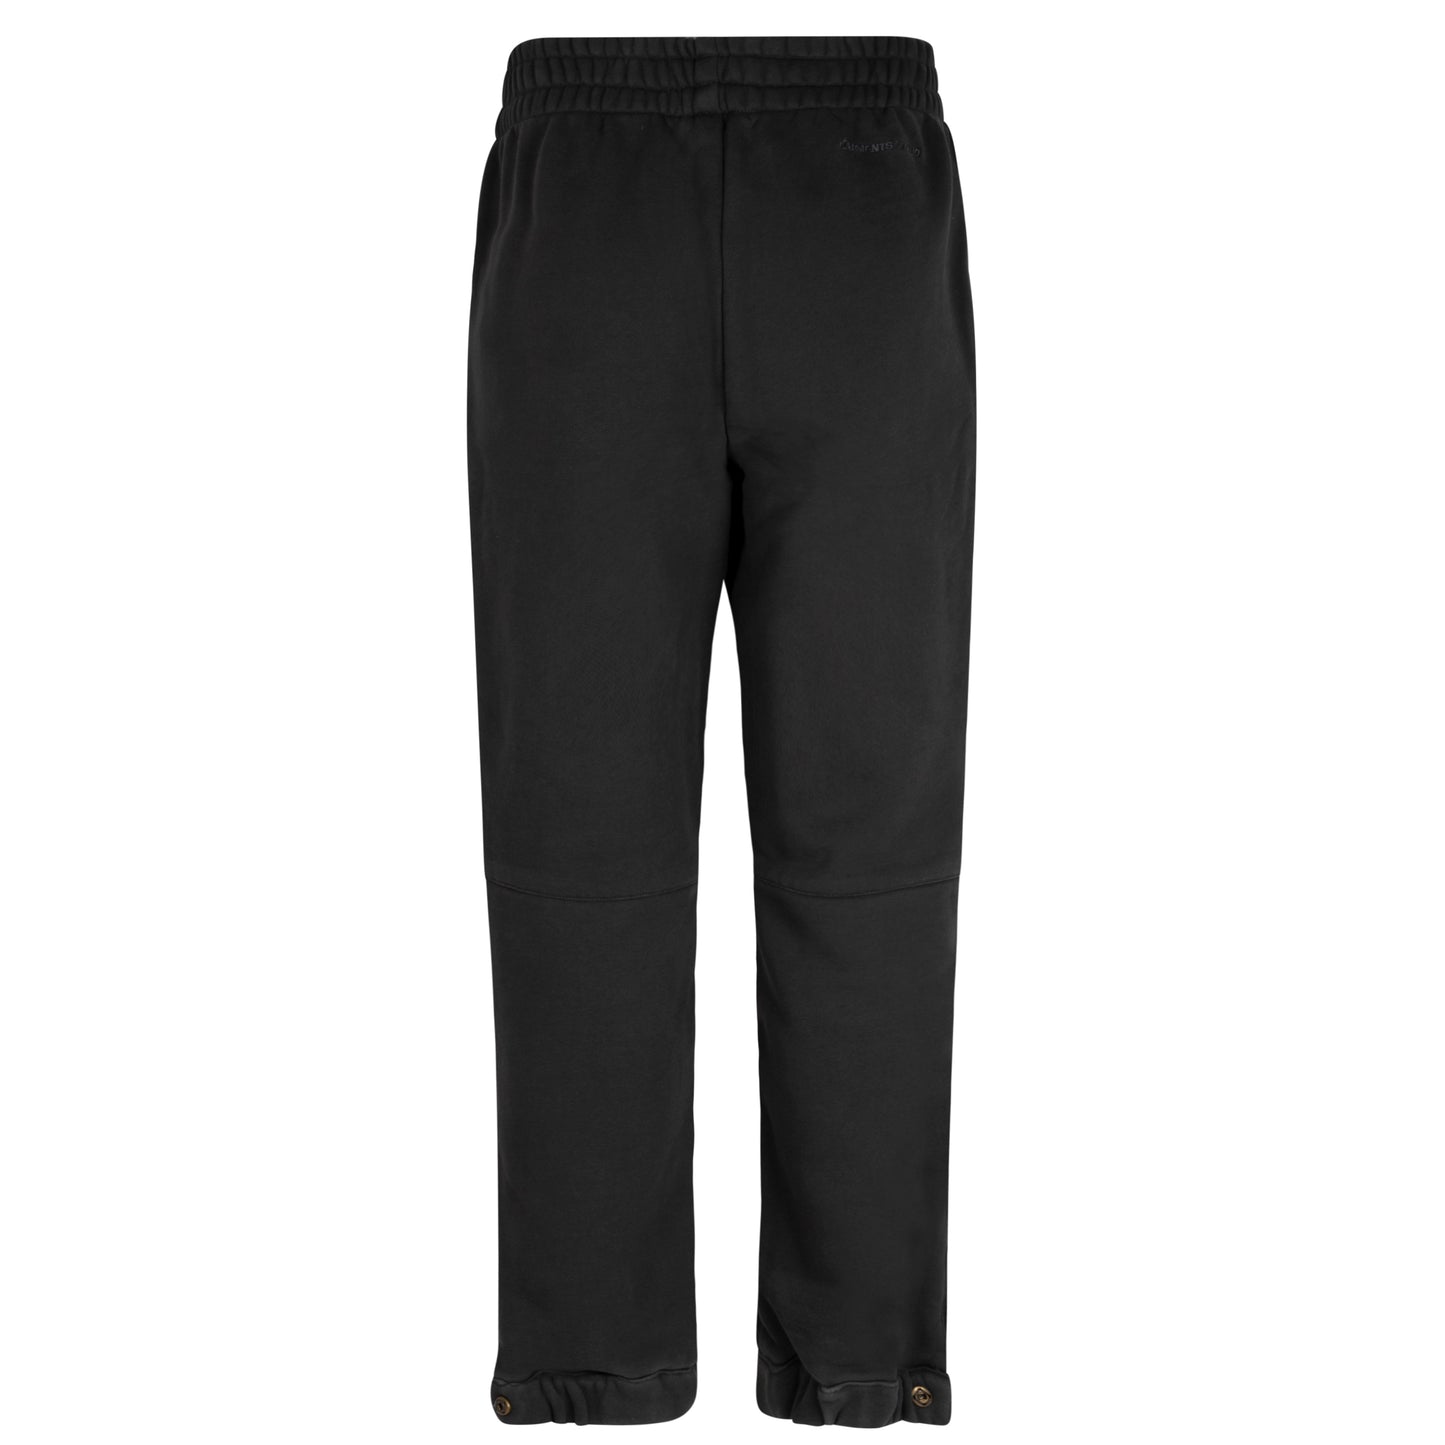 THE PERFECT SWEATPANTS - SUNFADED ANTHRACITE